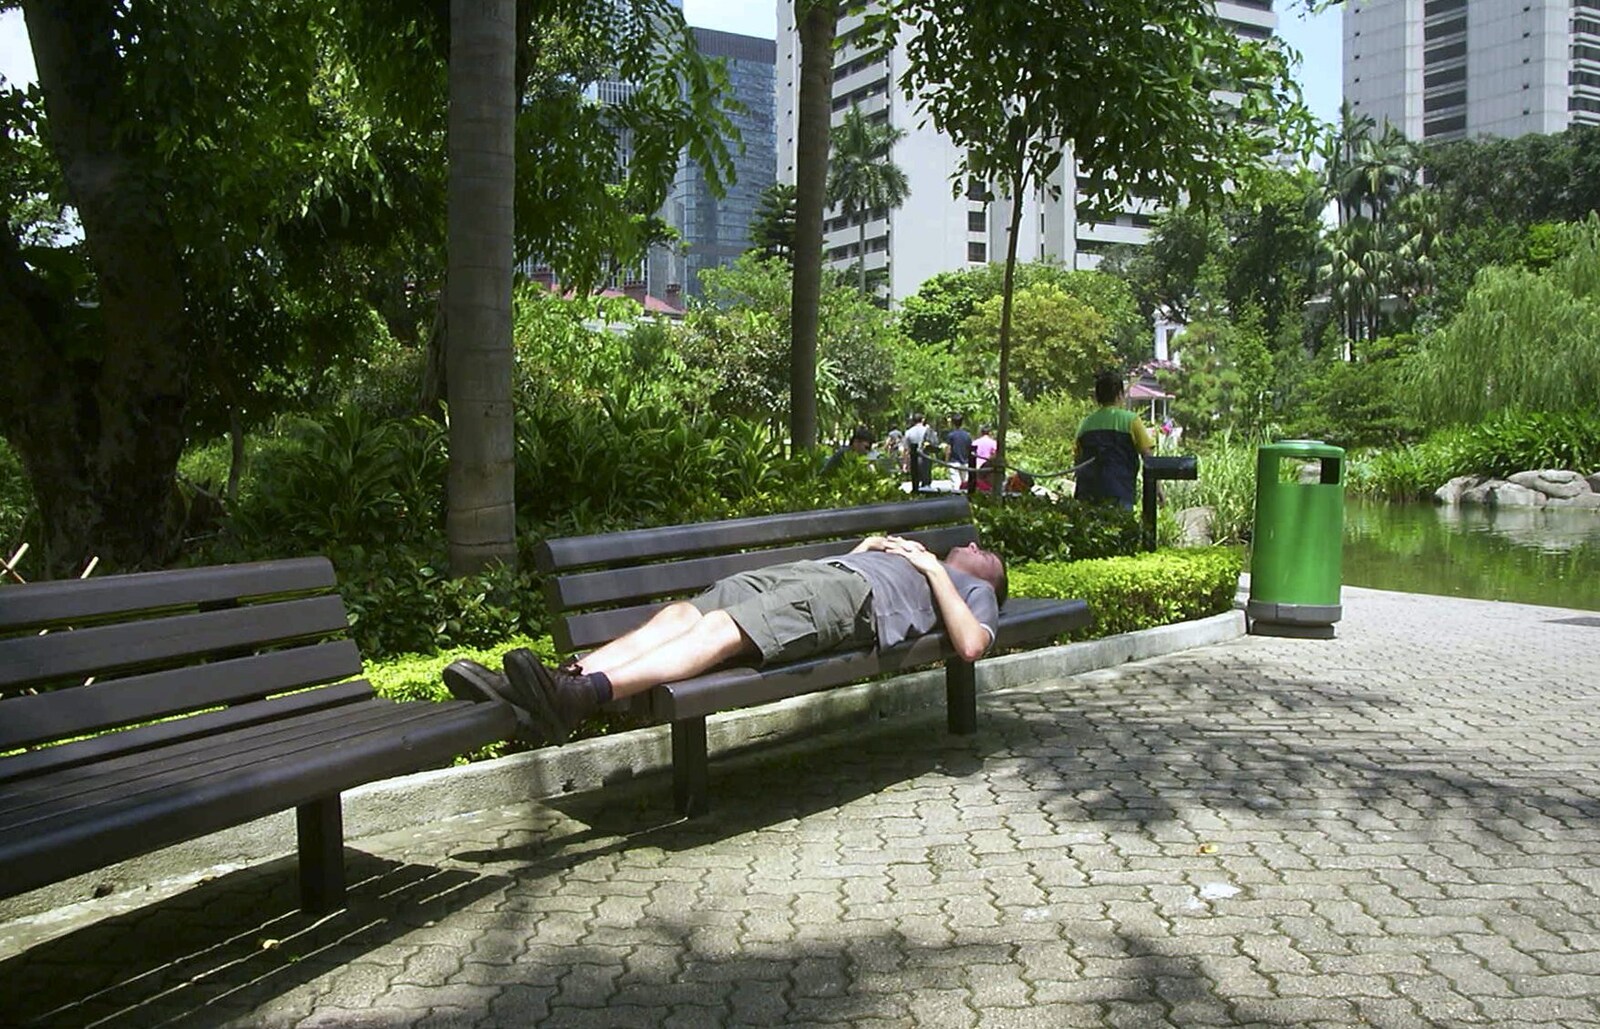 A Trip to Hong Kong, China - 11th August 2001: Time for a quick snooze in the park